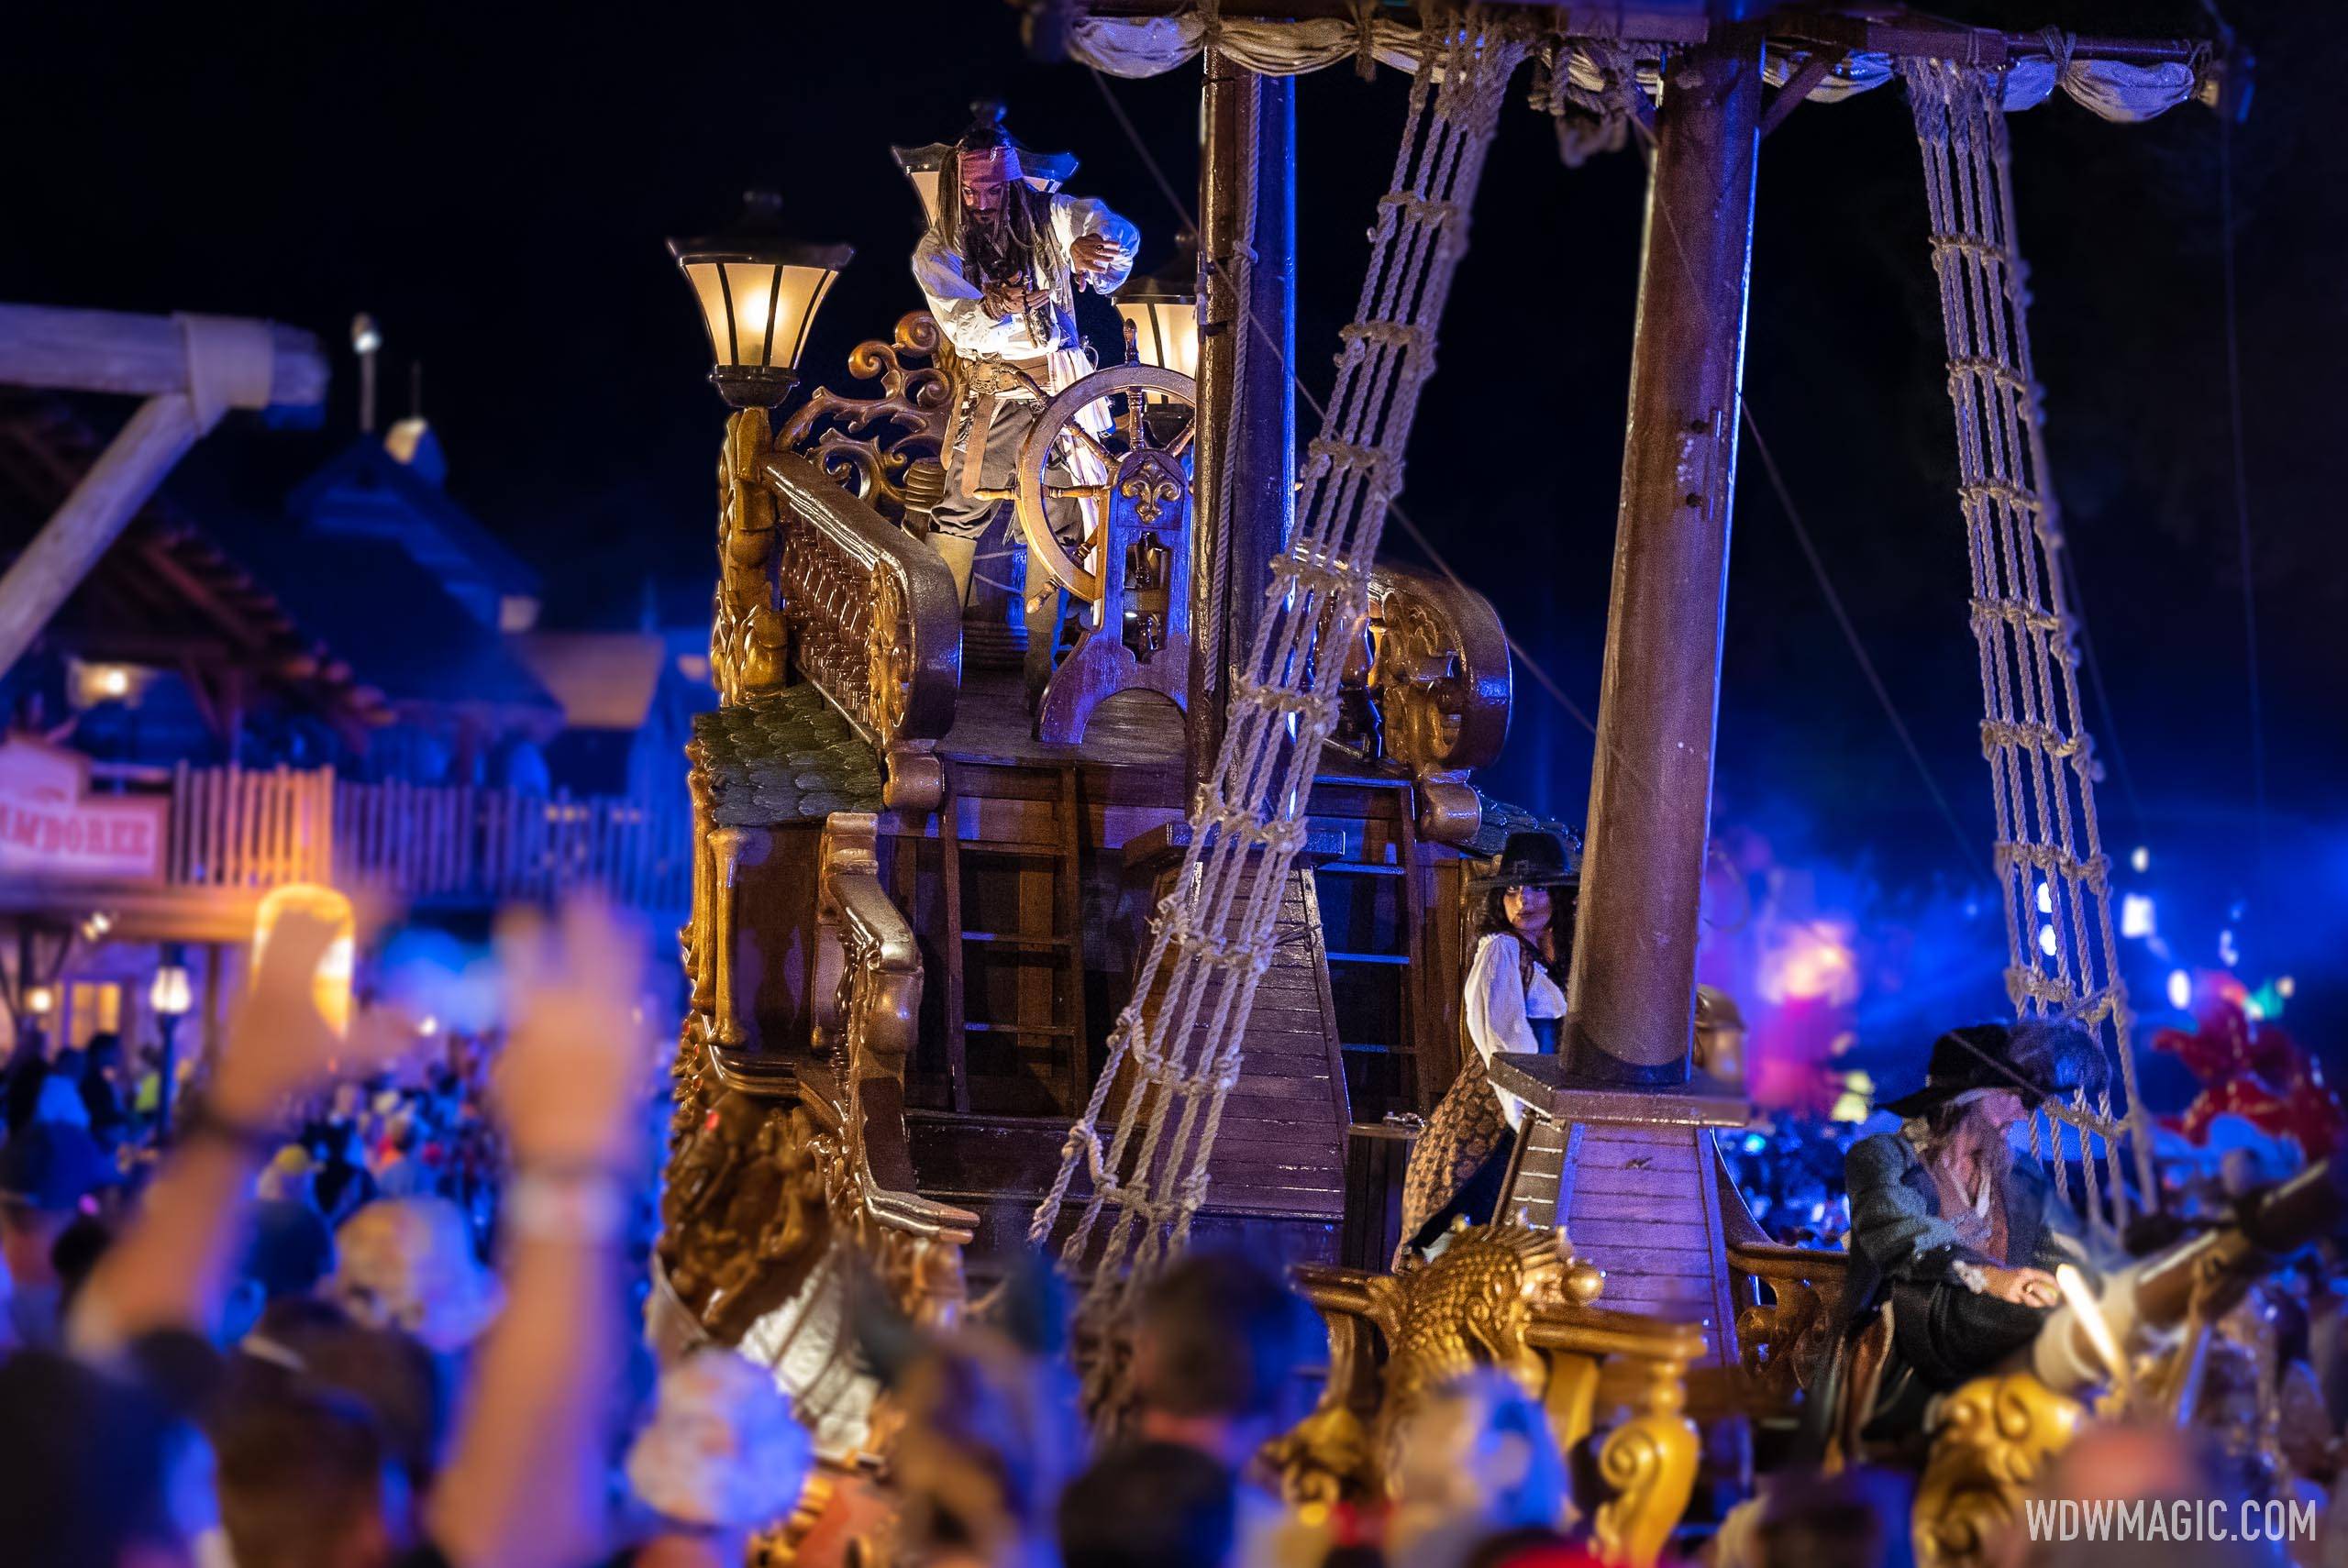 Mickey's Boo-To-You Halloween Parade - Pirates of the Caribbean unit